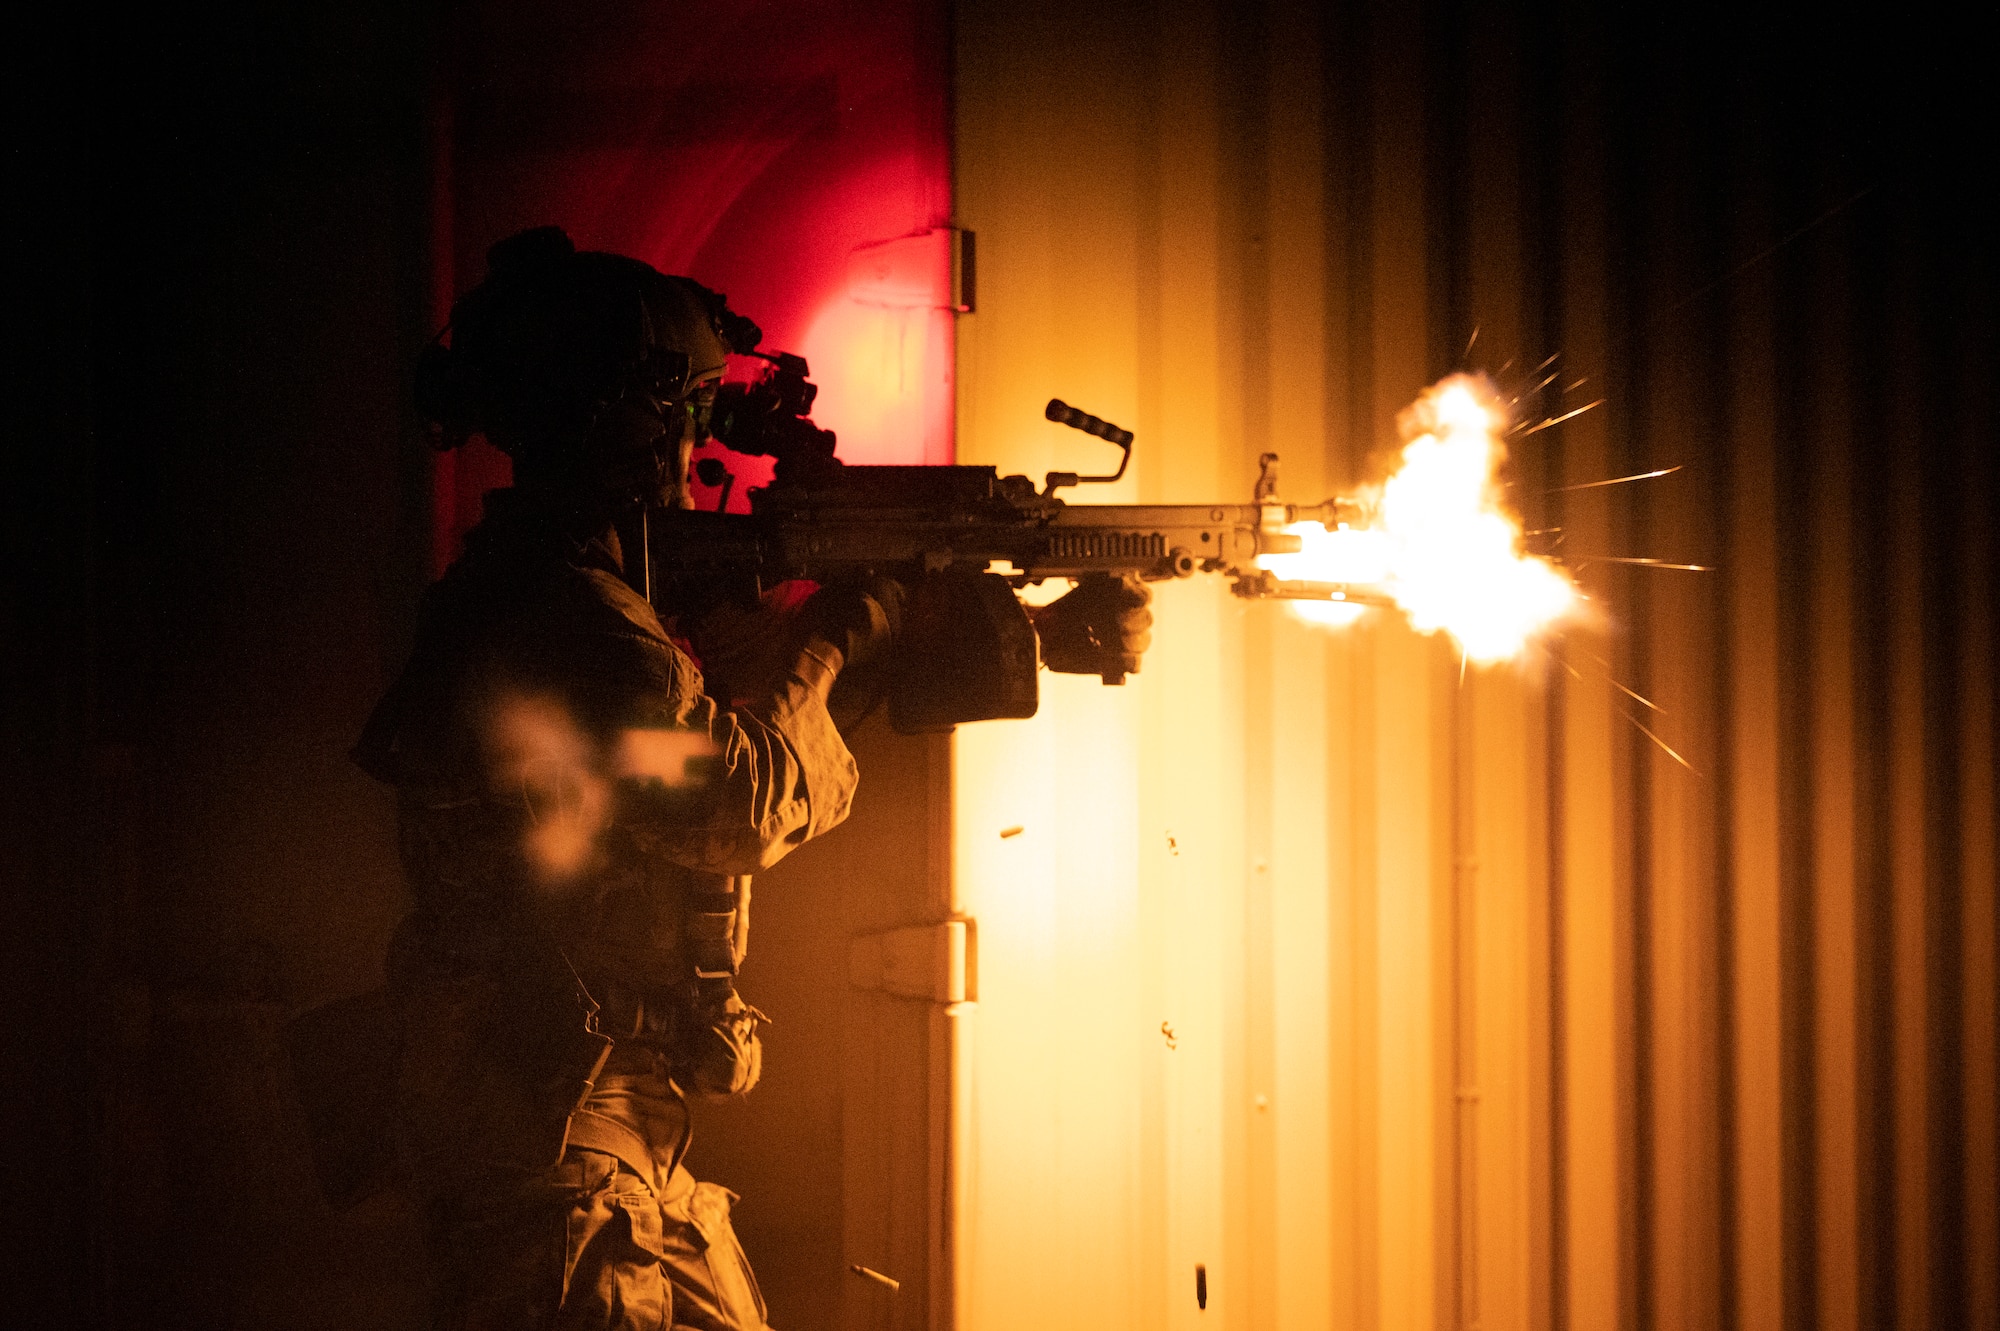 Someone in military garb is illuminated in yellow light as they fire a weapon in the dark.